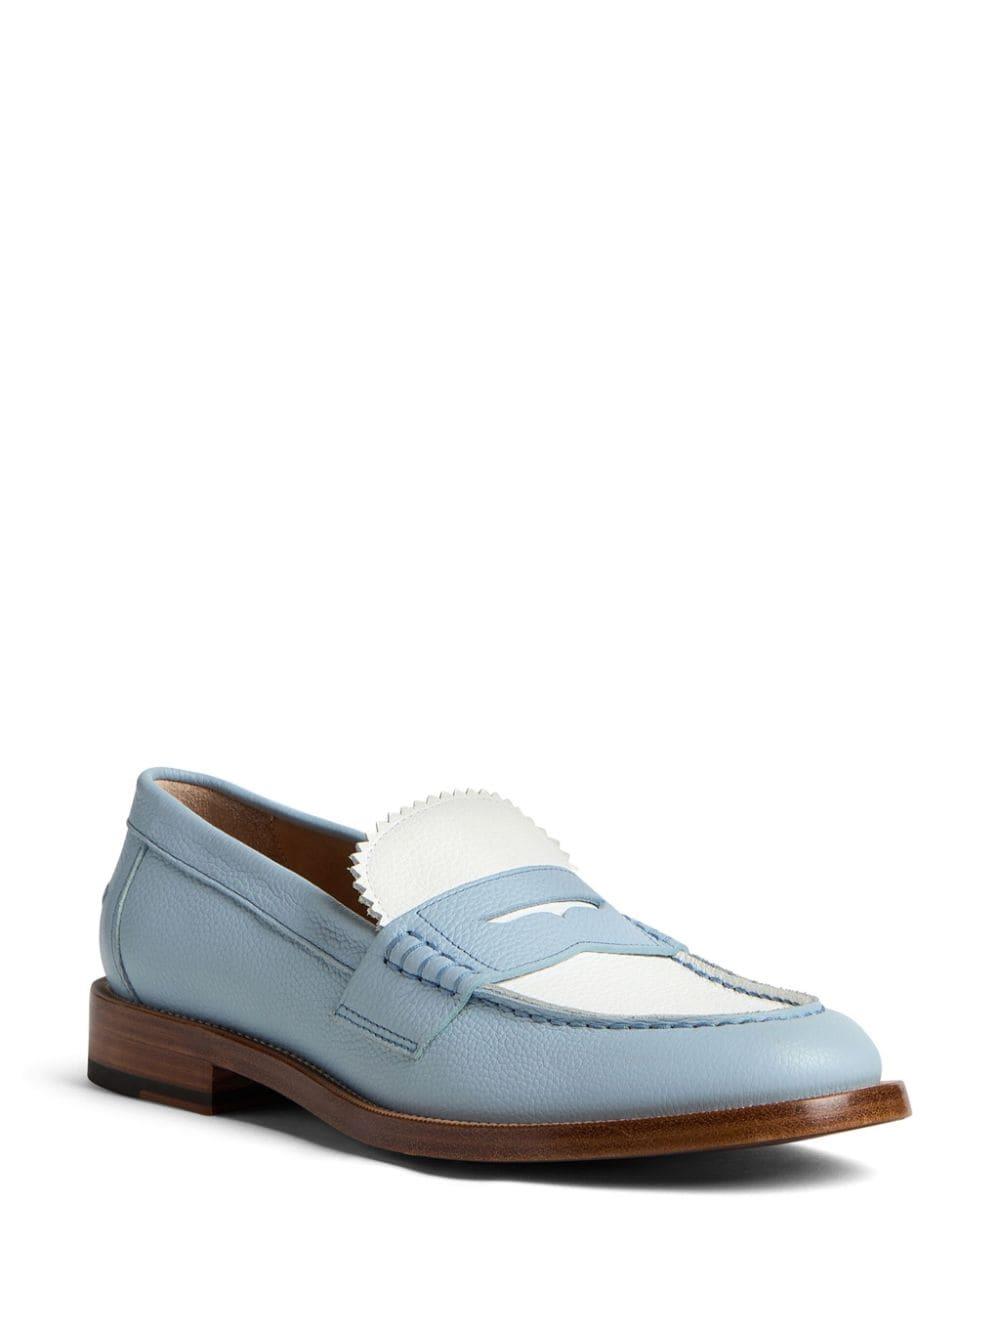 Dsquared2 two-tone leather loafers - Blue